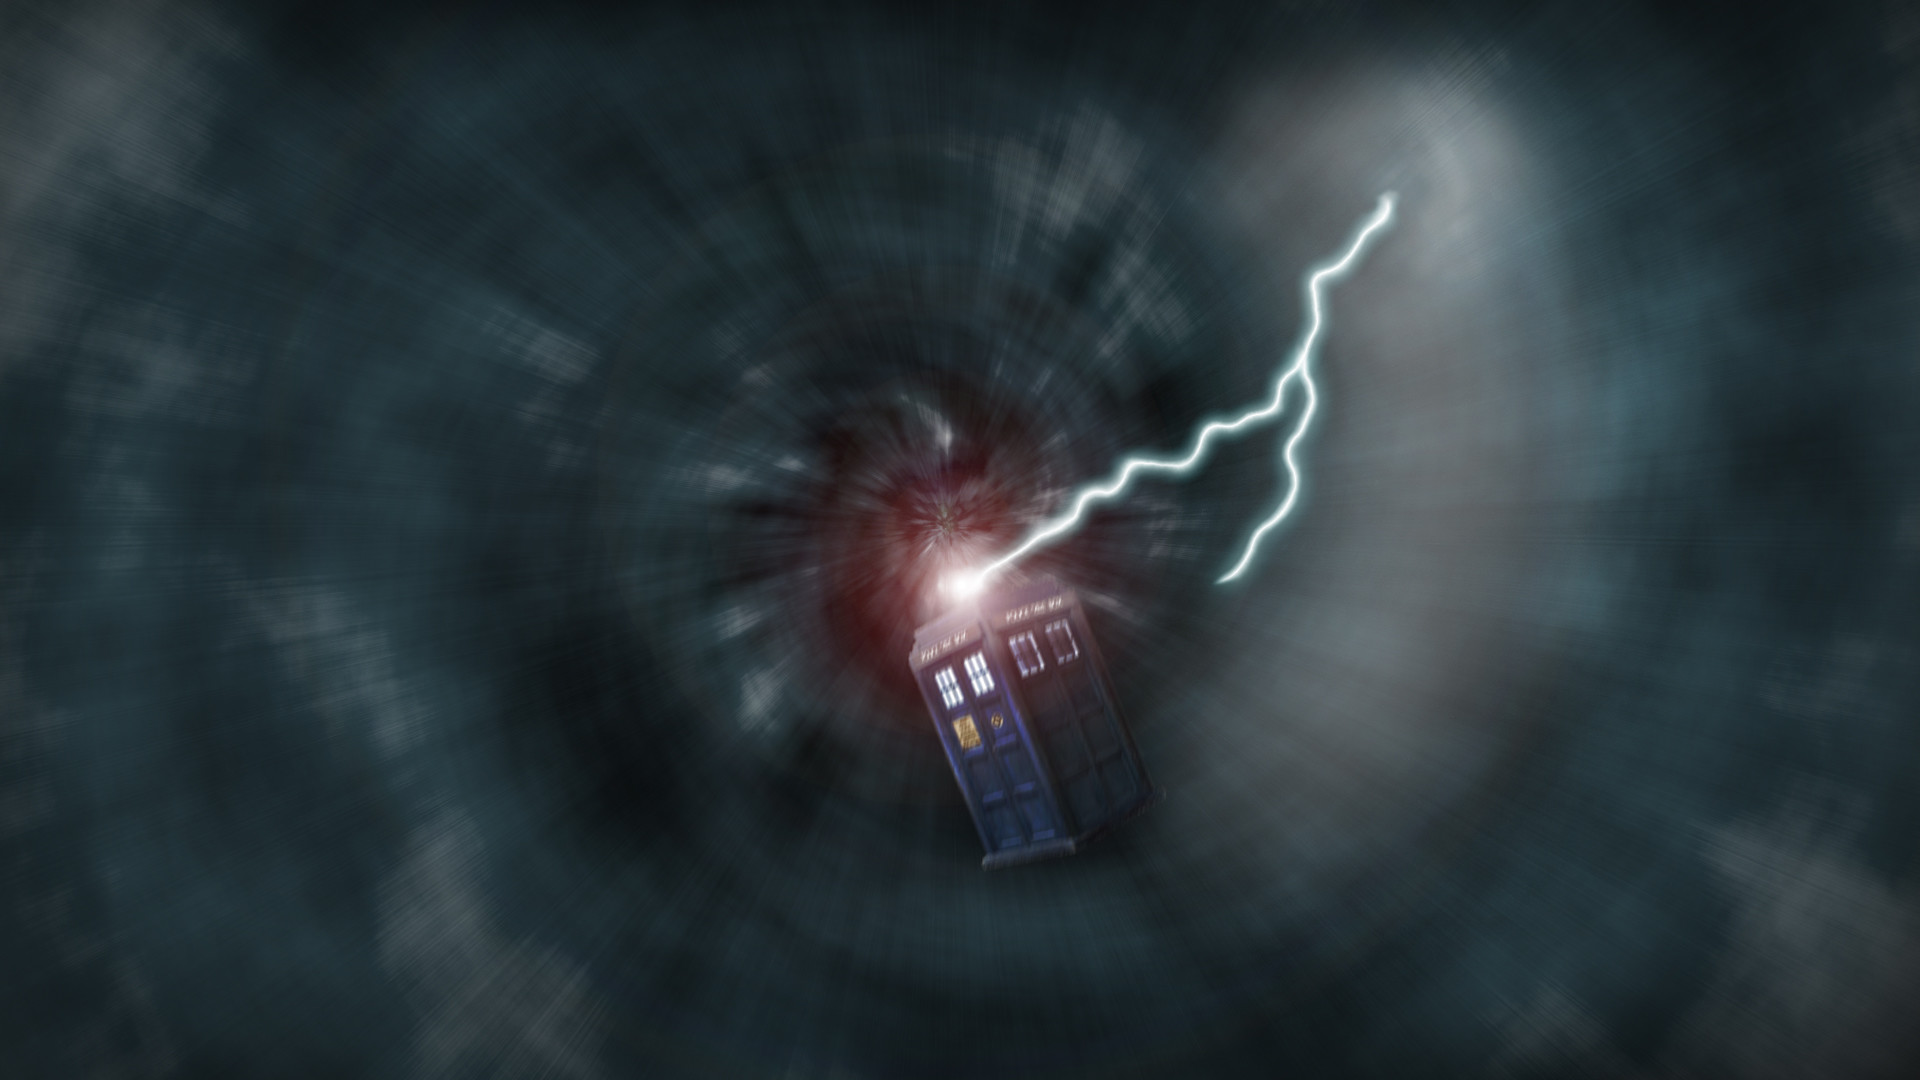 Doctor who wallpapers HD A12 – Dr Who Wallpapers Doctor who backgrounds doctor who